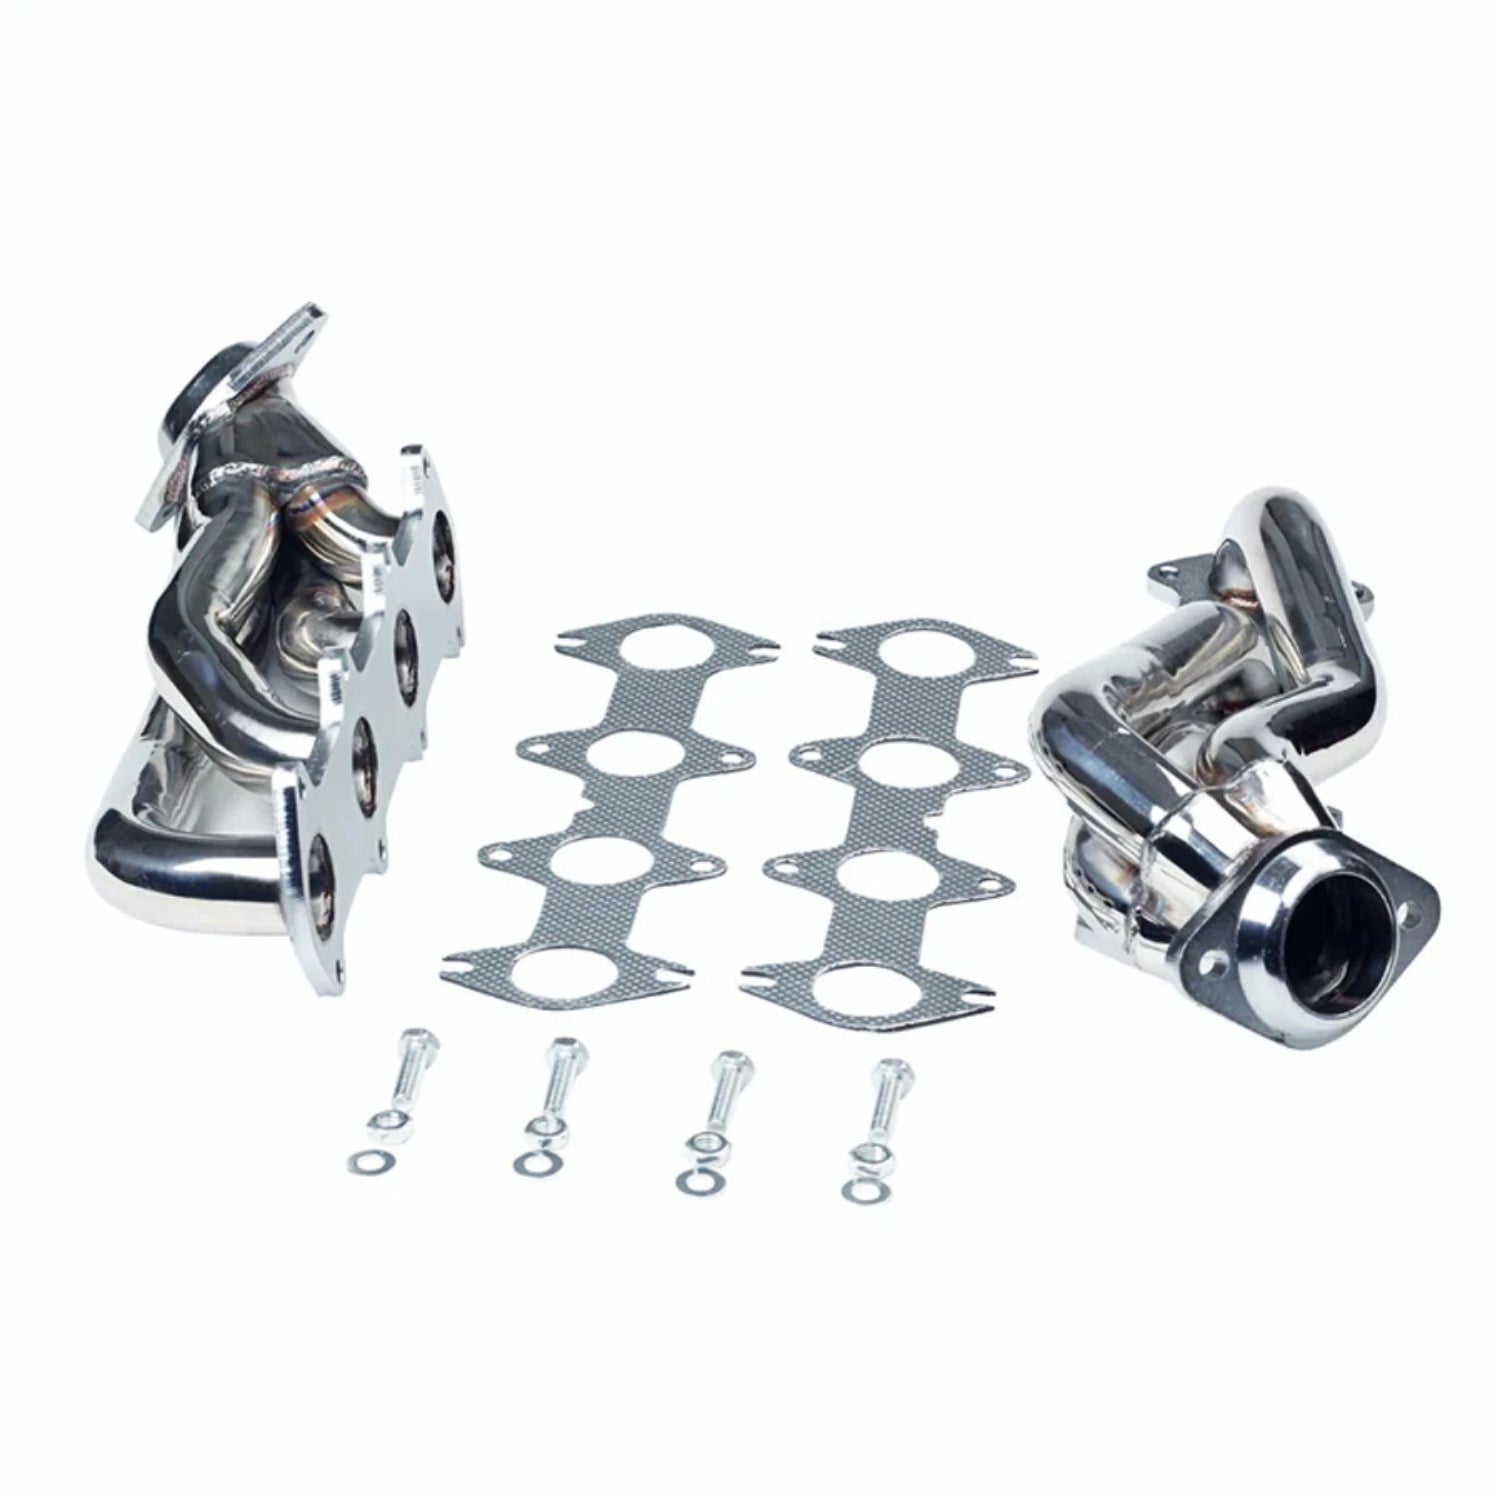 Performance Stainless Shorty Exhaust Manifold Headers for Ford F150 2004-2010 5.4L V8